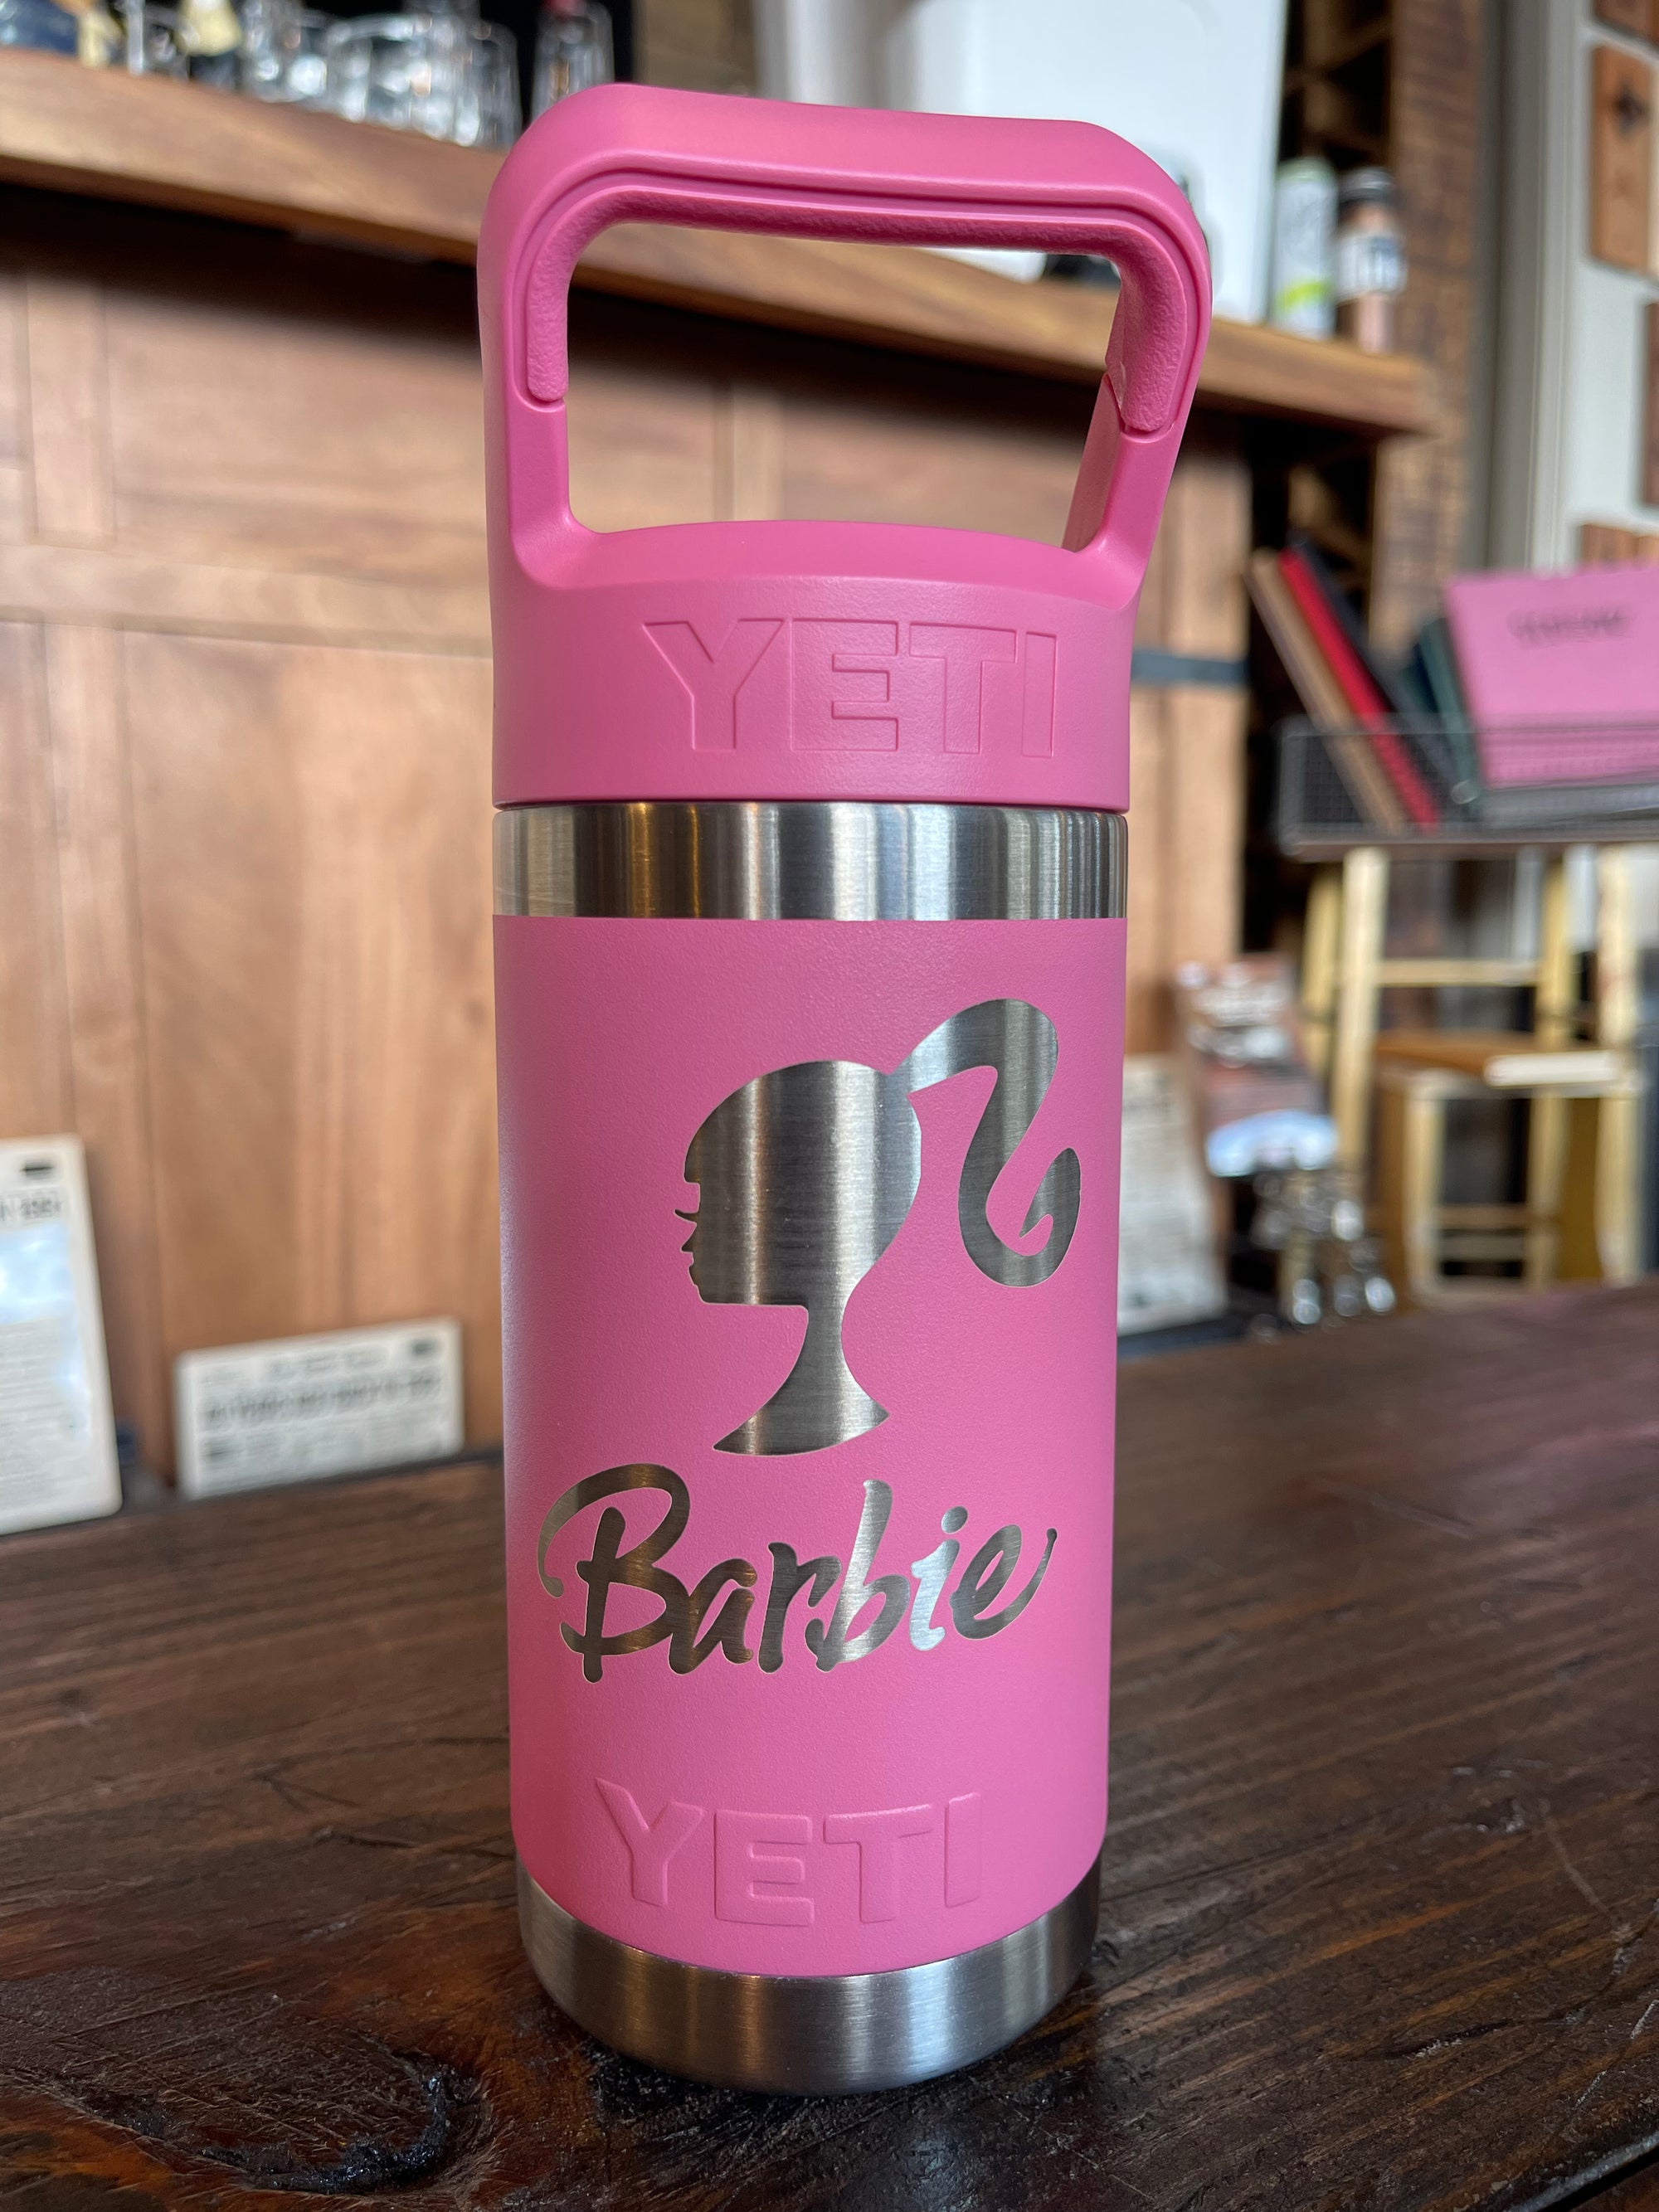 Personalized Kid's Metal Water Bottles - etchthisout